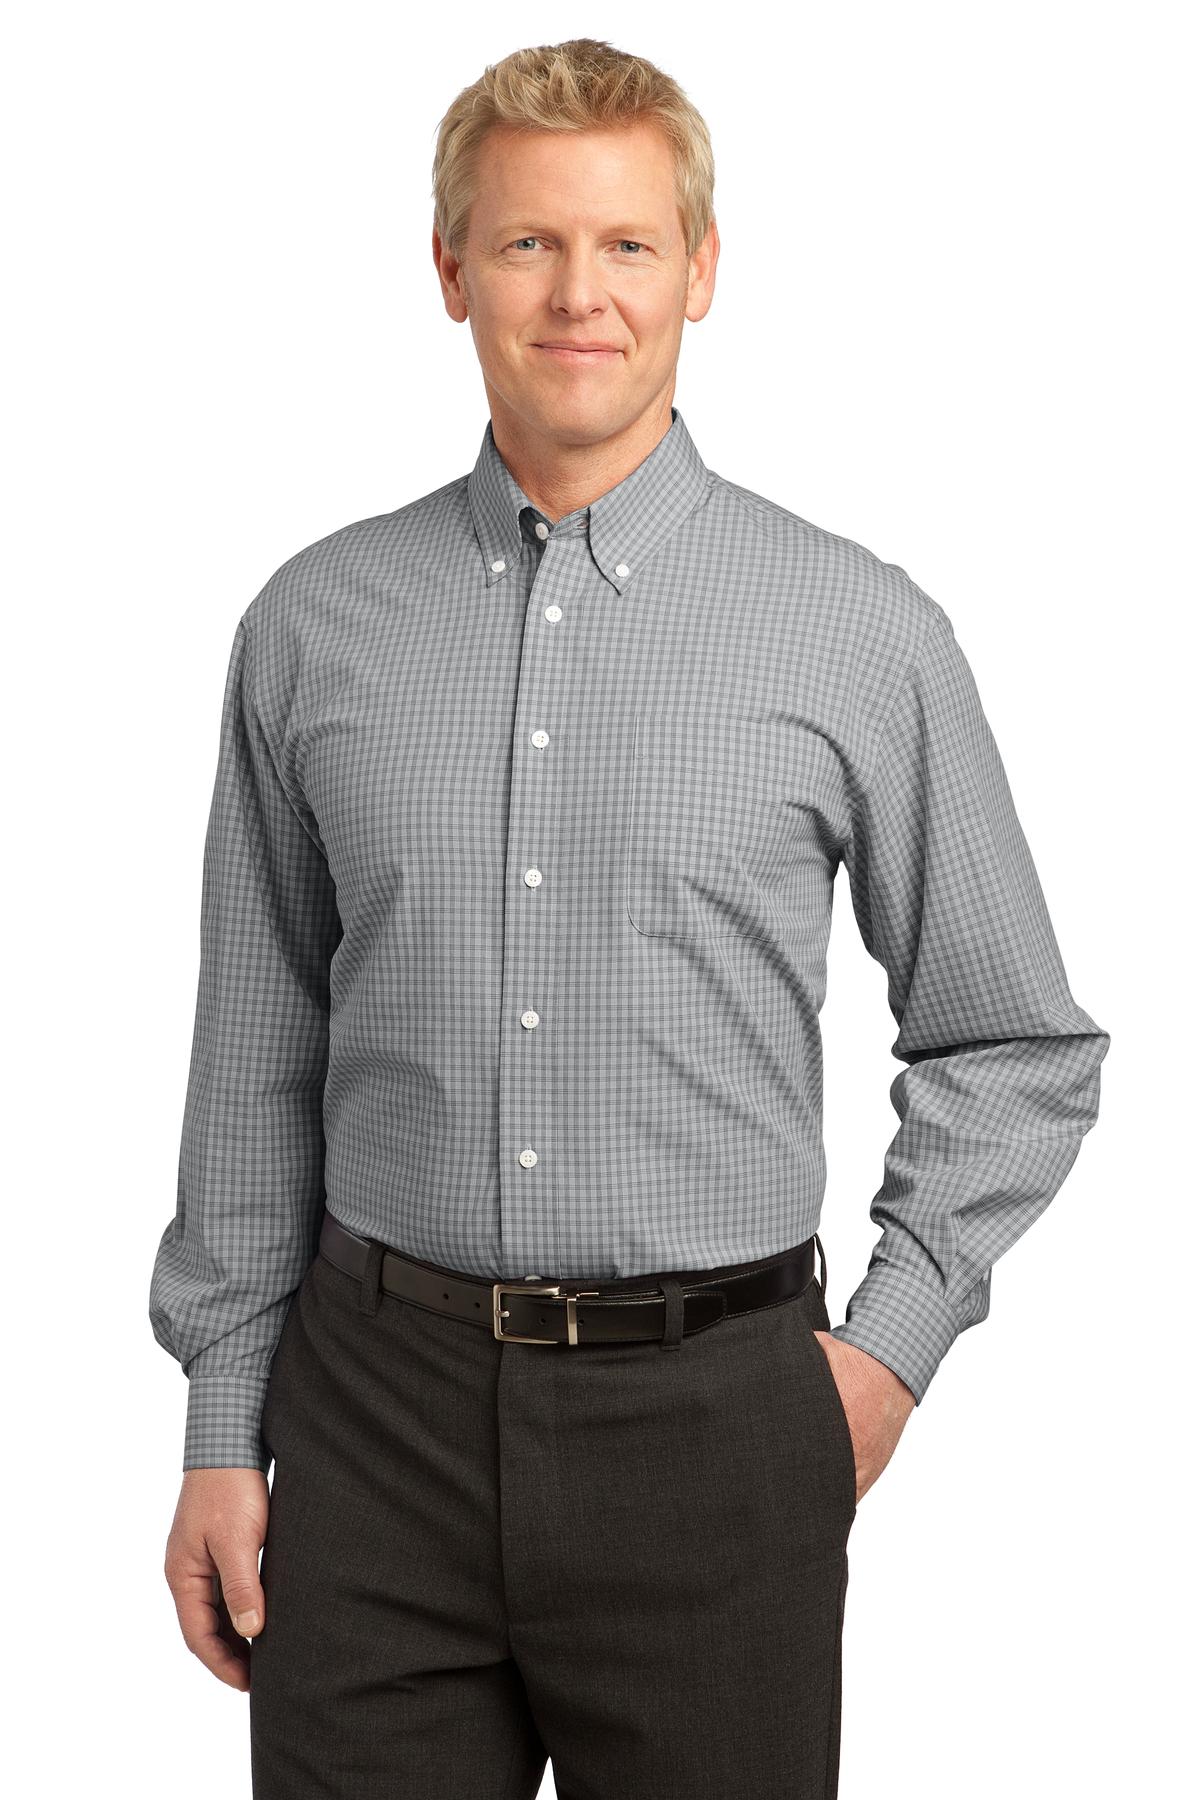 Port Authority Plaid Pattern Easy Care Shirt-Port Authority